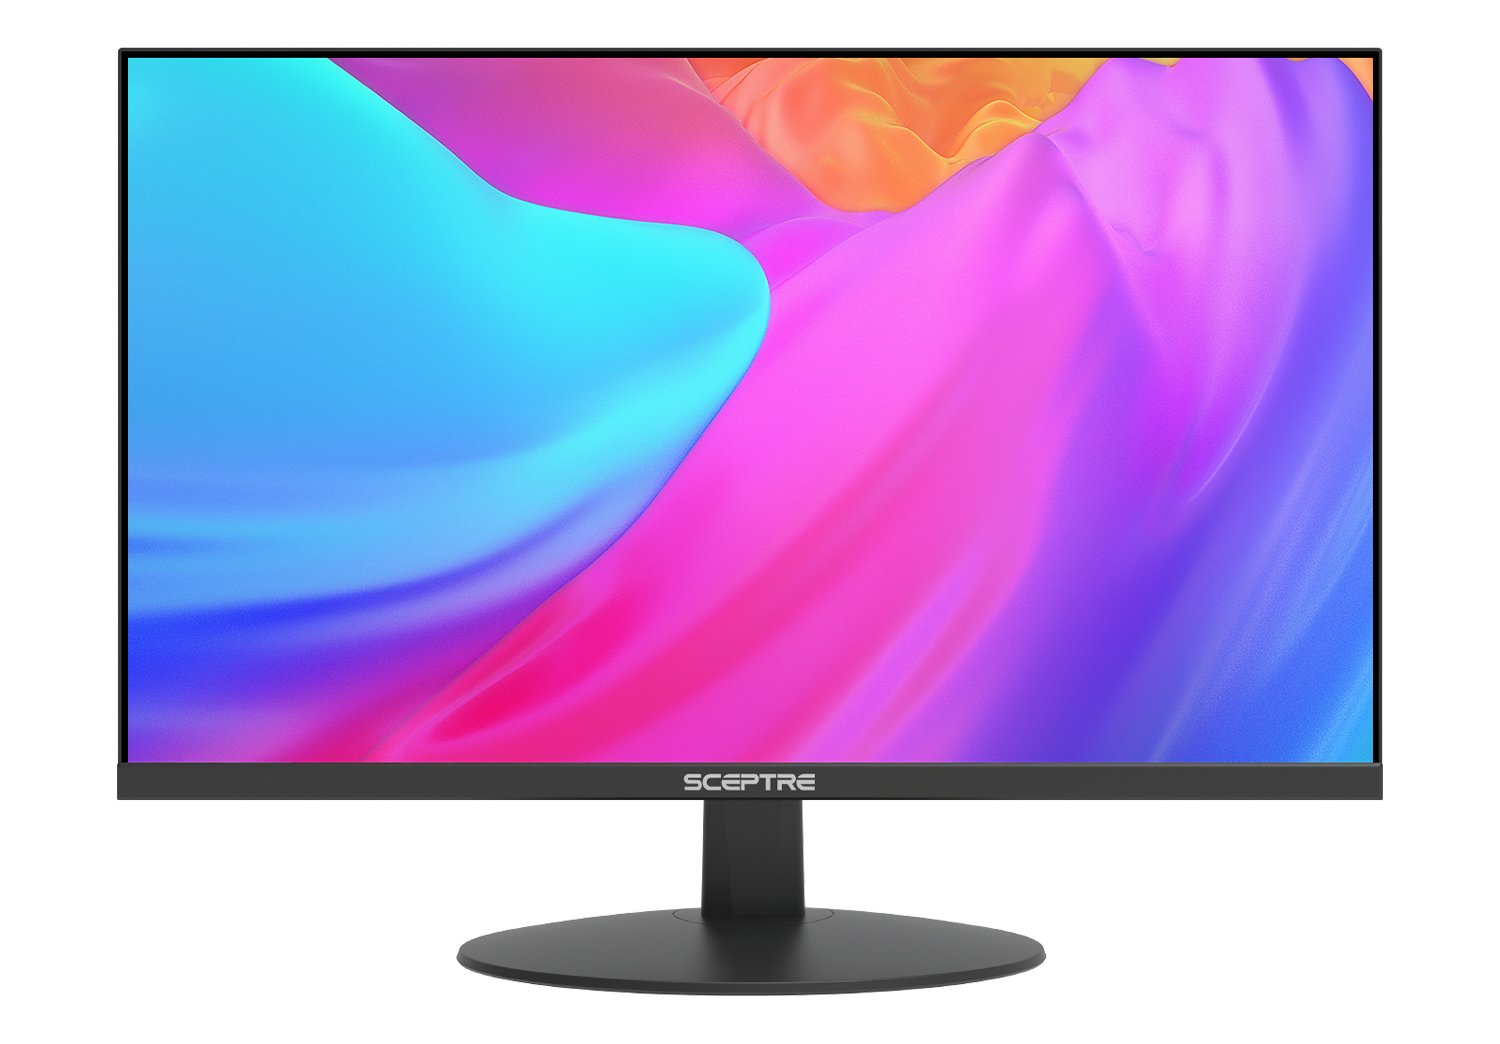 Sceptre IPS 24-Inch Business Computer Monitor 1080p 75Hz with HDMI VGA  Build-in Speakers, Machine Black (E248W-FPT)